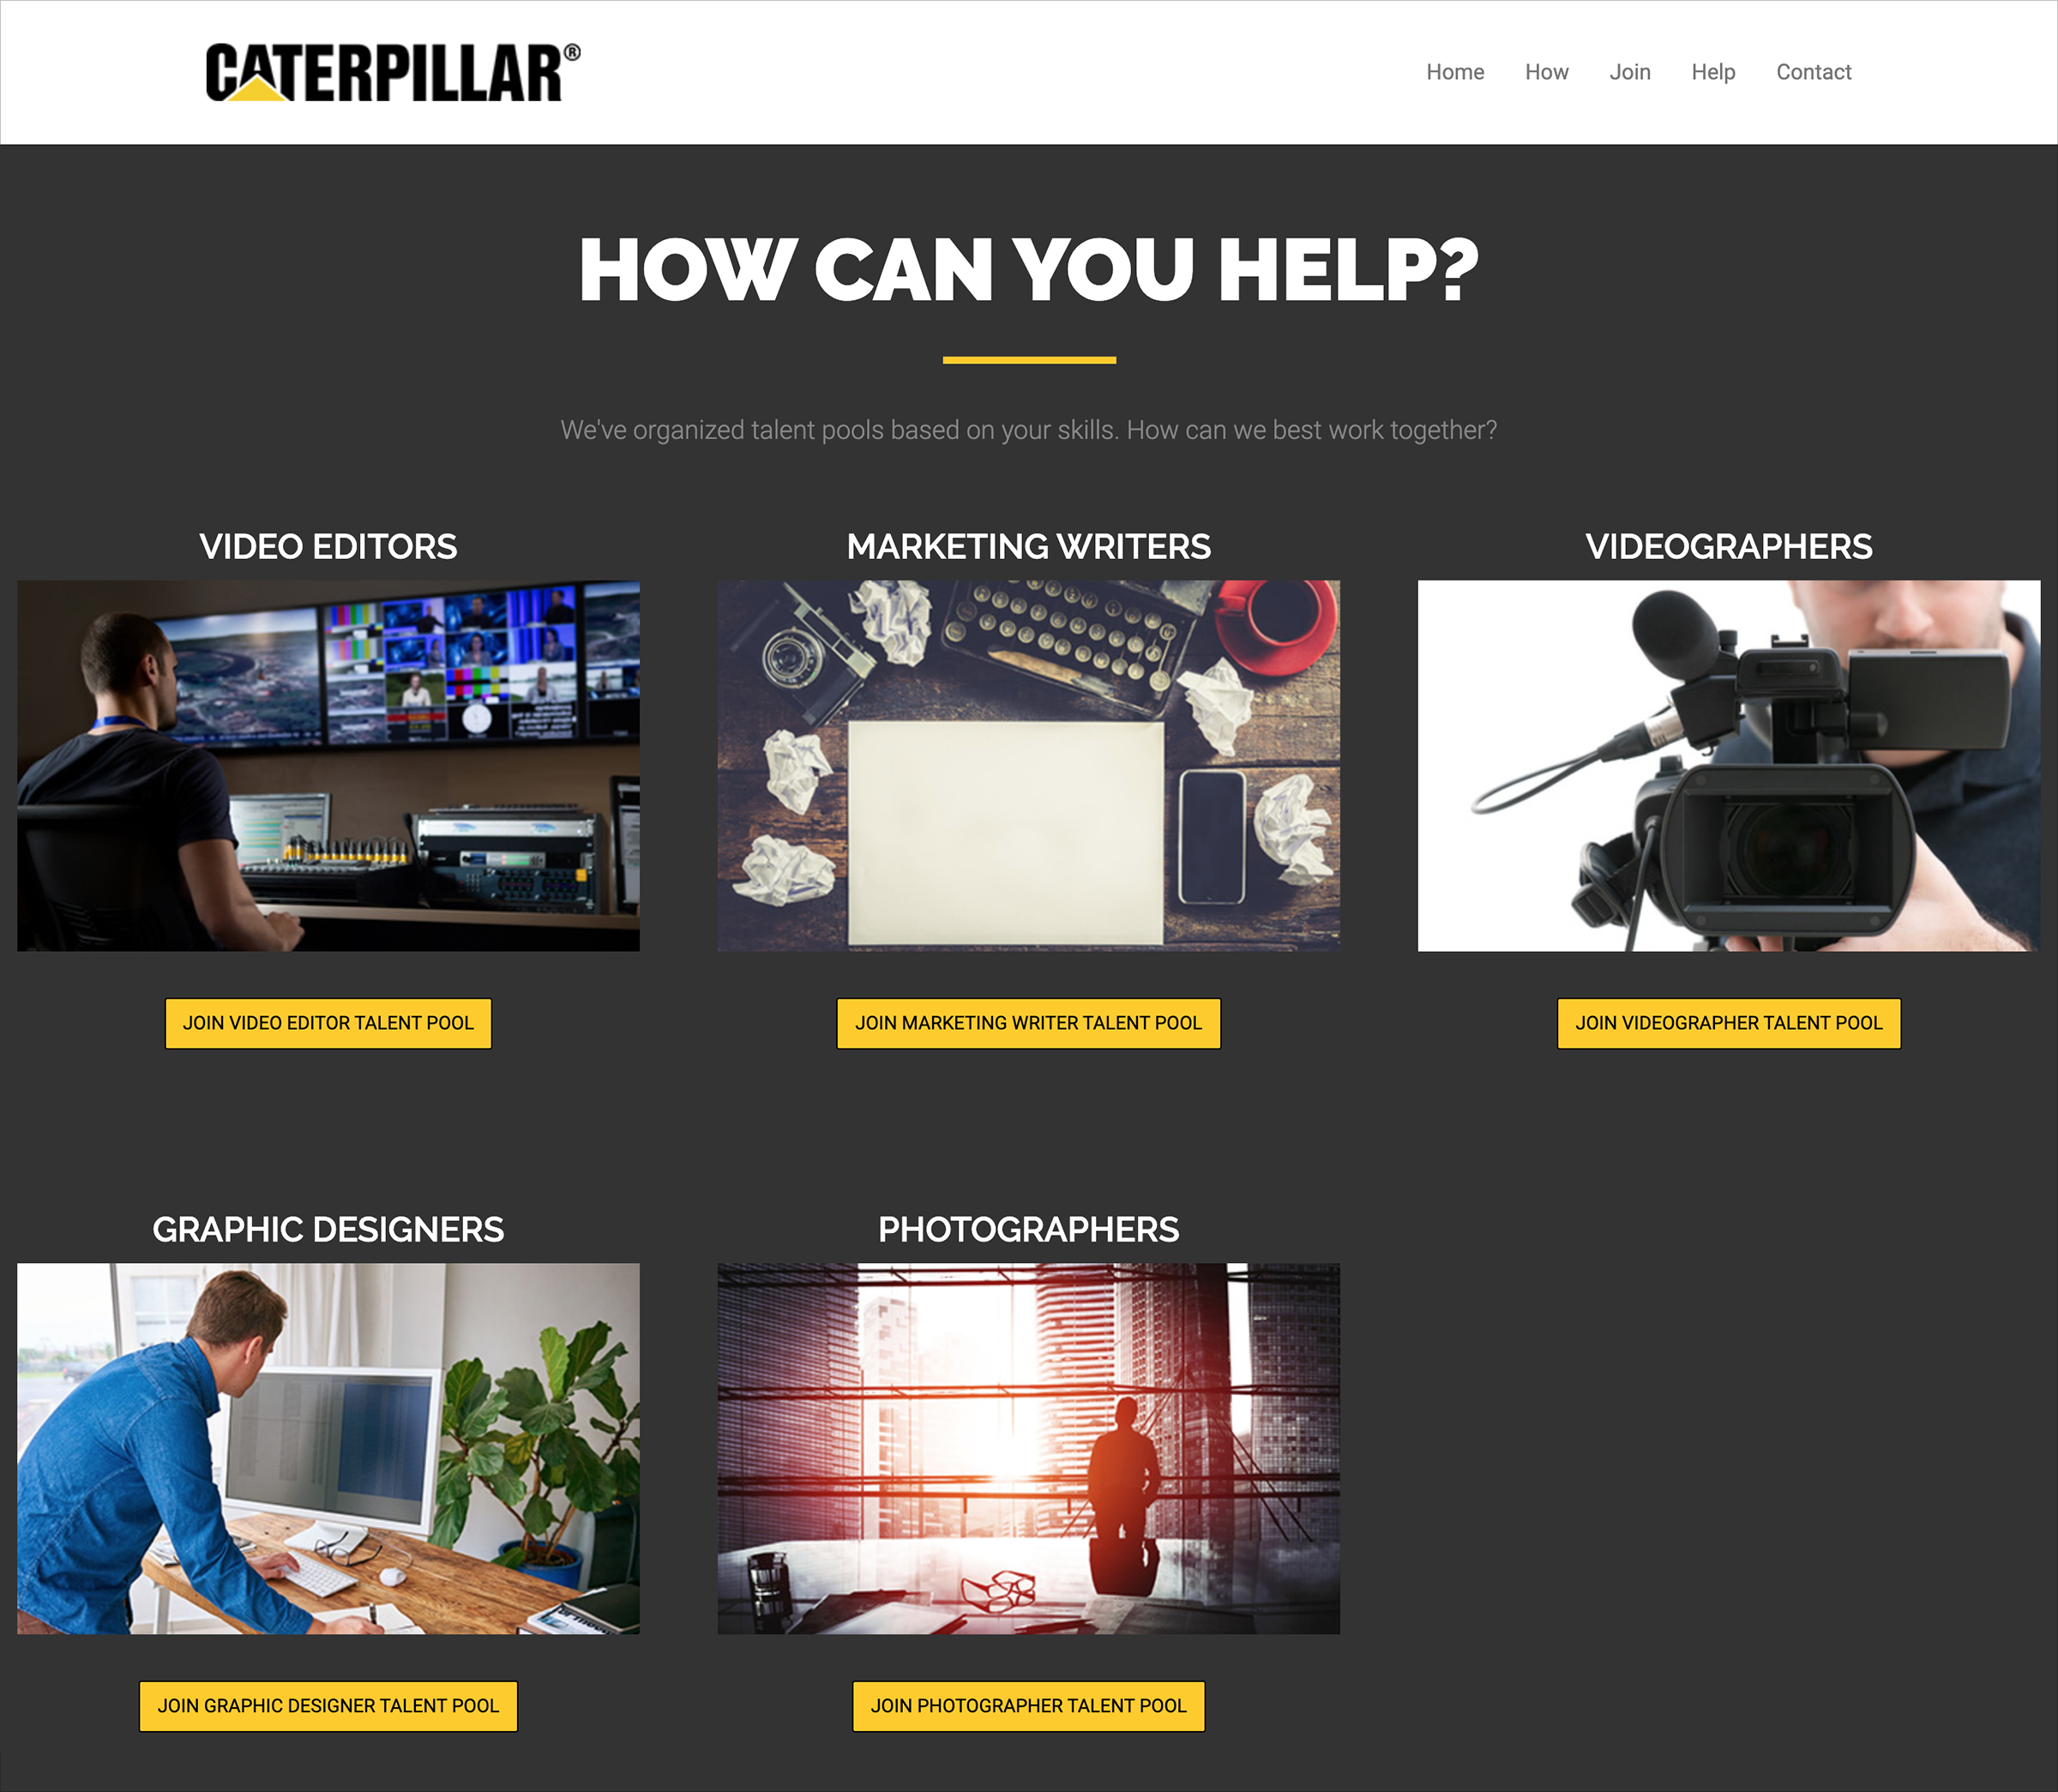 Caterpillar’s website displays its range of talent communities based on the skills of prospective hires.